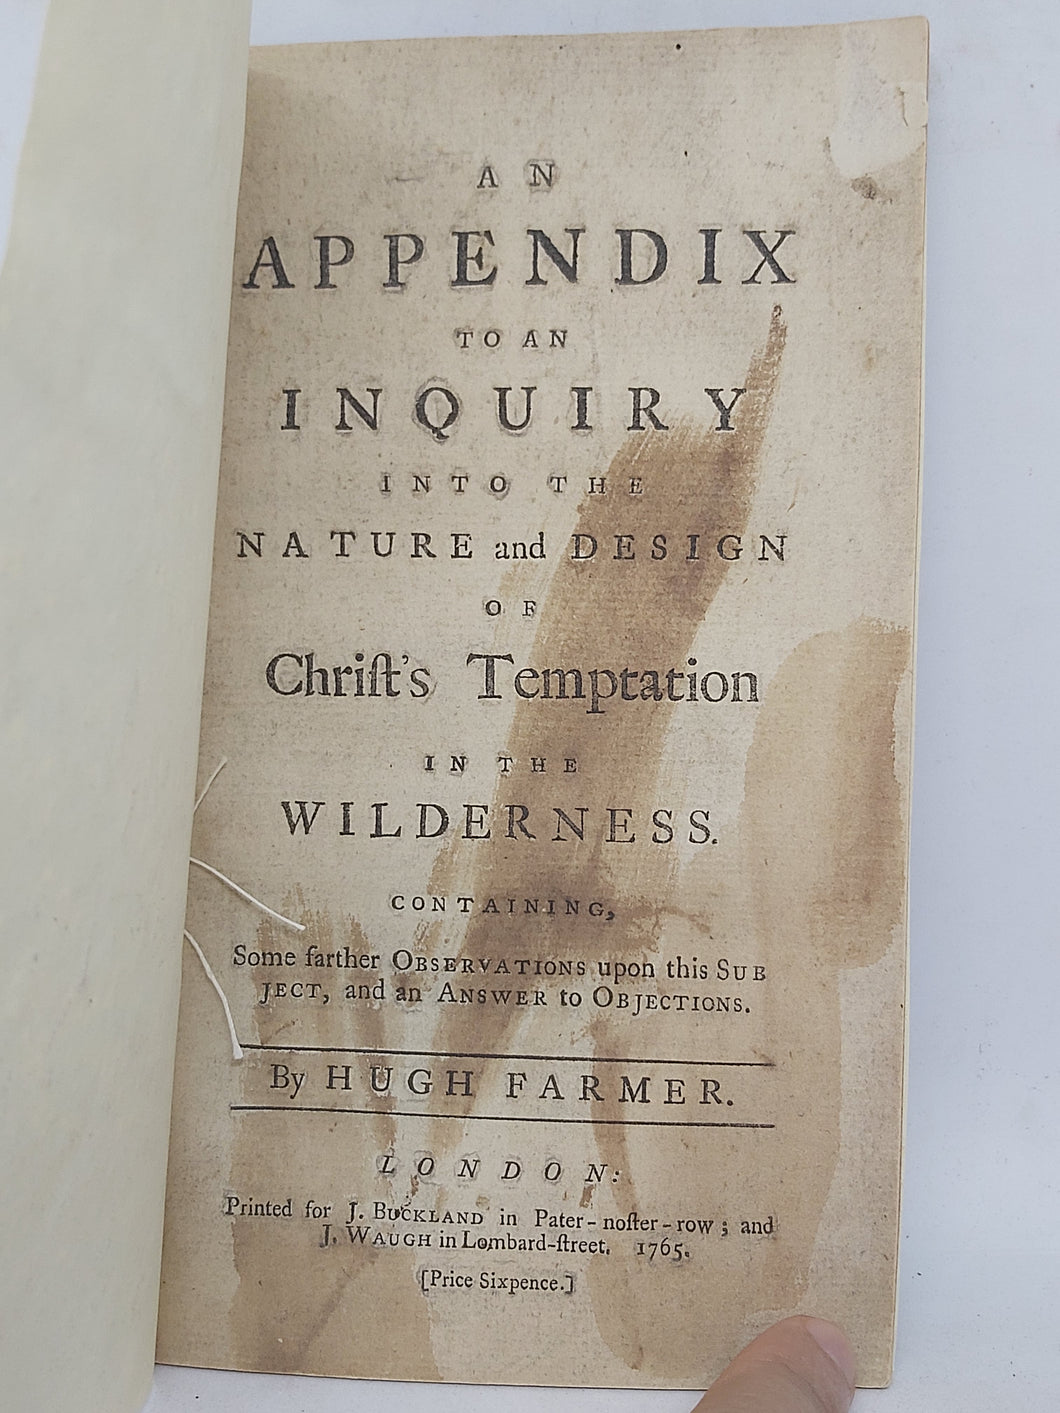 An Appendix to an inquiry into the nature and design of Christ's temptation in the wilderness, 1765